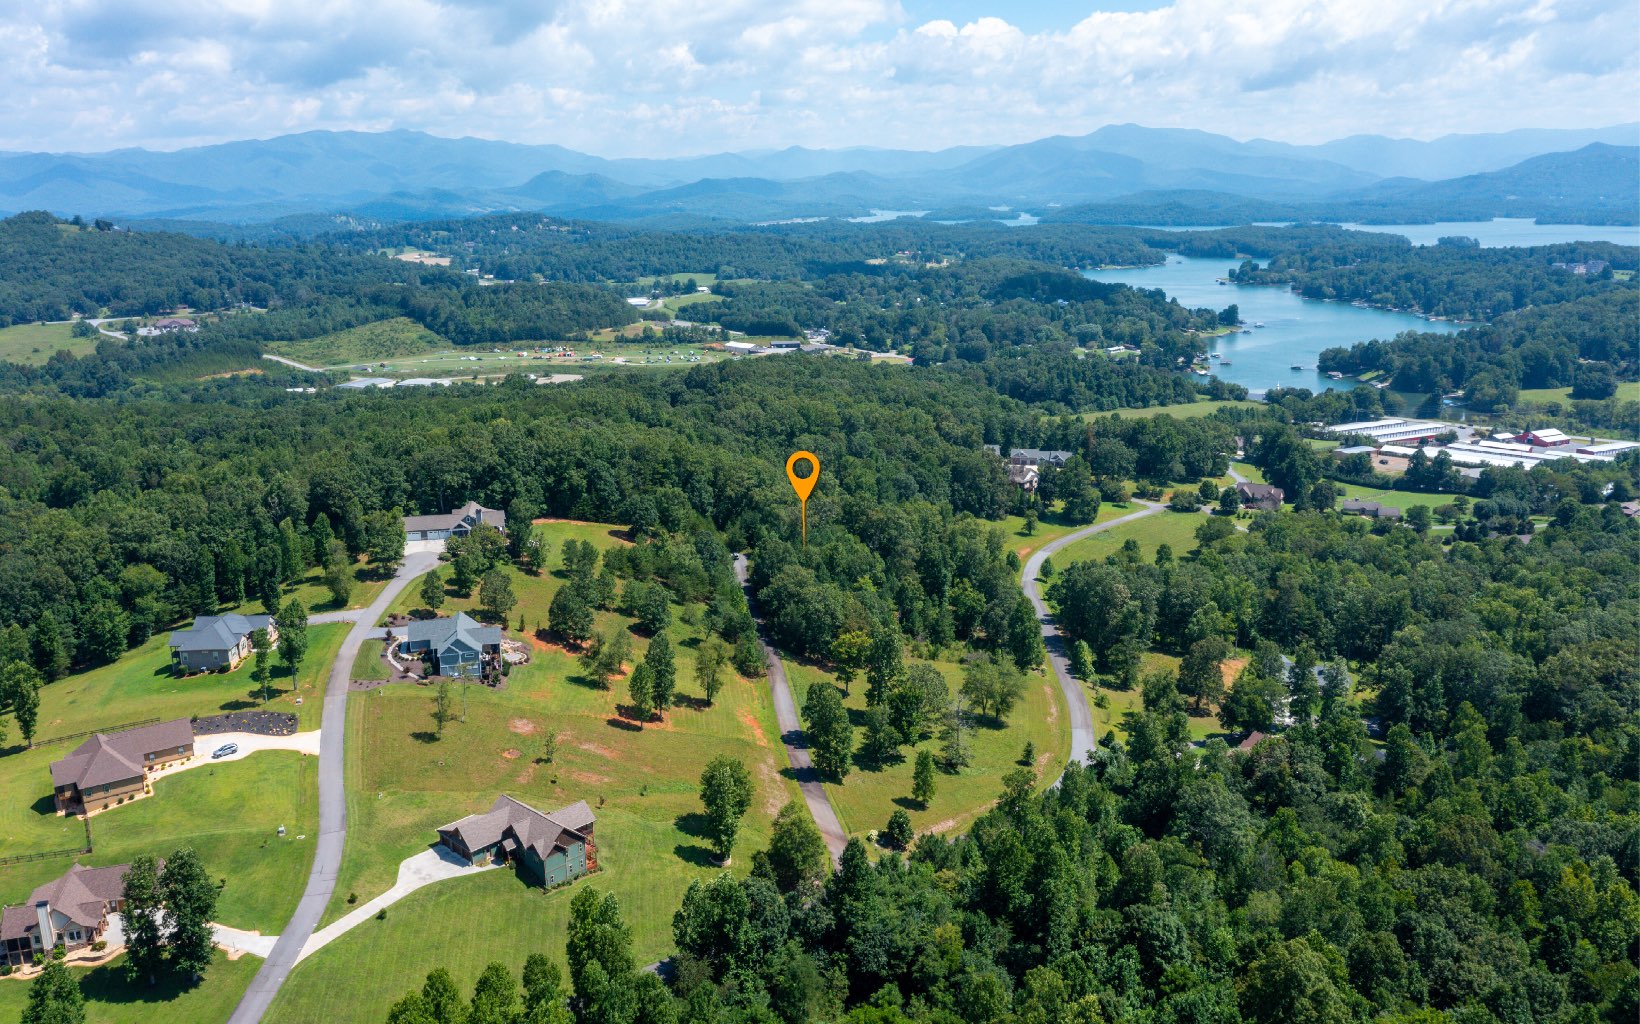 2 LOTS IN THE NORTH GA MOUNTAINS IN GATED COMMUNITY WITH POOL, TENNIS COURT & CLUBHOUSE!! Searching for the perfect property that checks ALL the boxes? Look no further!! Breathtaking, cascading layers of long range mountain and lake views await once you begin clearing for your dream mountain home. Location is absolutely unbeatable. Centrally located in an upscale, gated community in Young Harris and just minutes from the main highway. Wide paved roads, stellar views of both sunrise and sunset, community pool & hot tub, fiber optic internet, clubhouse, and tennis/pickleball courts. Long, paved road leads back to property tucked away in its own little private corner of the community. Multiple home sites to pick from and selectively cut trees to get the gorgeous wide open views from your home while still keeping privacy amongst the remaining property. Very gentle laying, spacious 2+ acres.